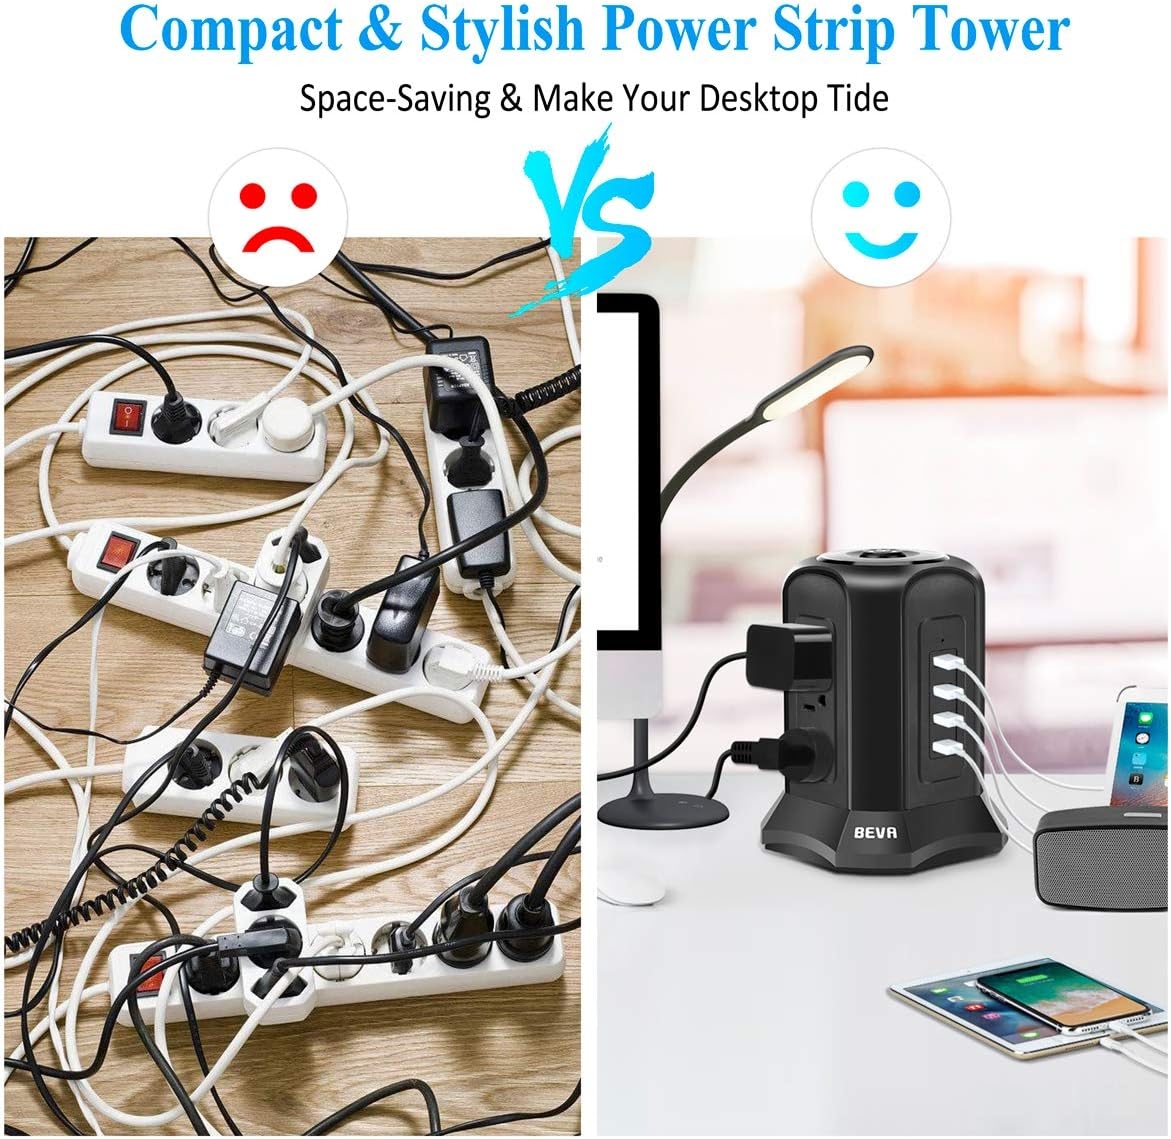 Desktop Power Strip Tower USB - BEVA 10 ft Surge Protector Power Strip Tower with 4 USB Ports 9 Outlets,Switch Control Power Outlet Strips Charging Station Long Extension Cable for Office and Home